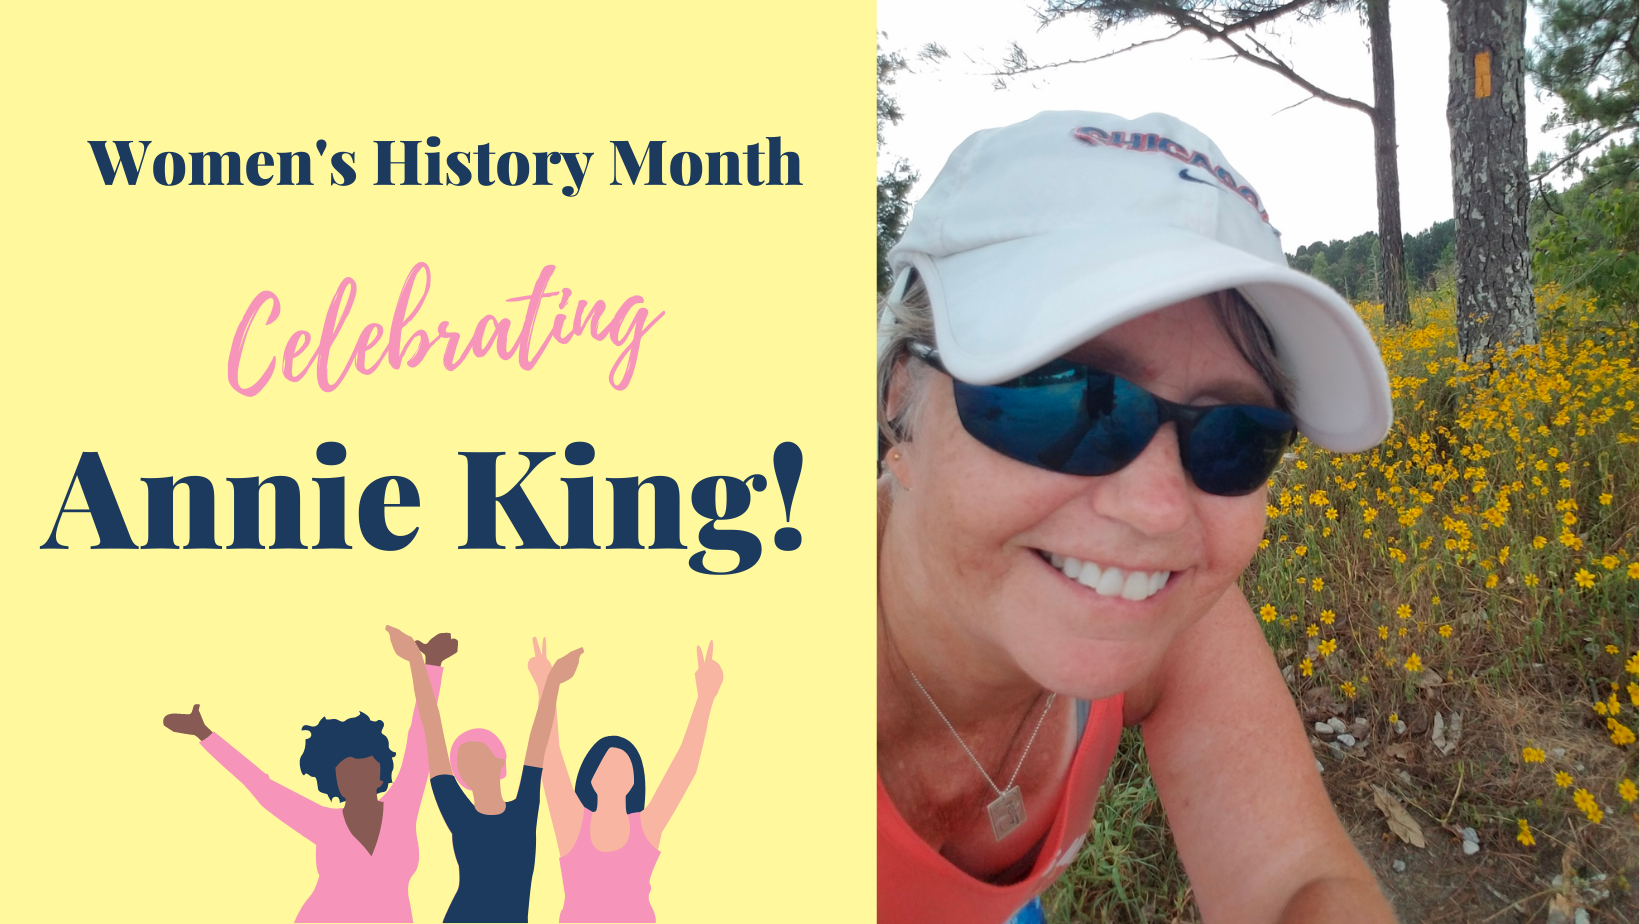 Women's History Month - Celebrating Annie King!